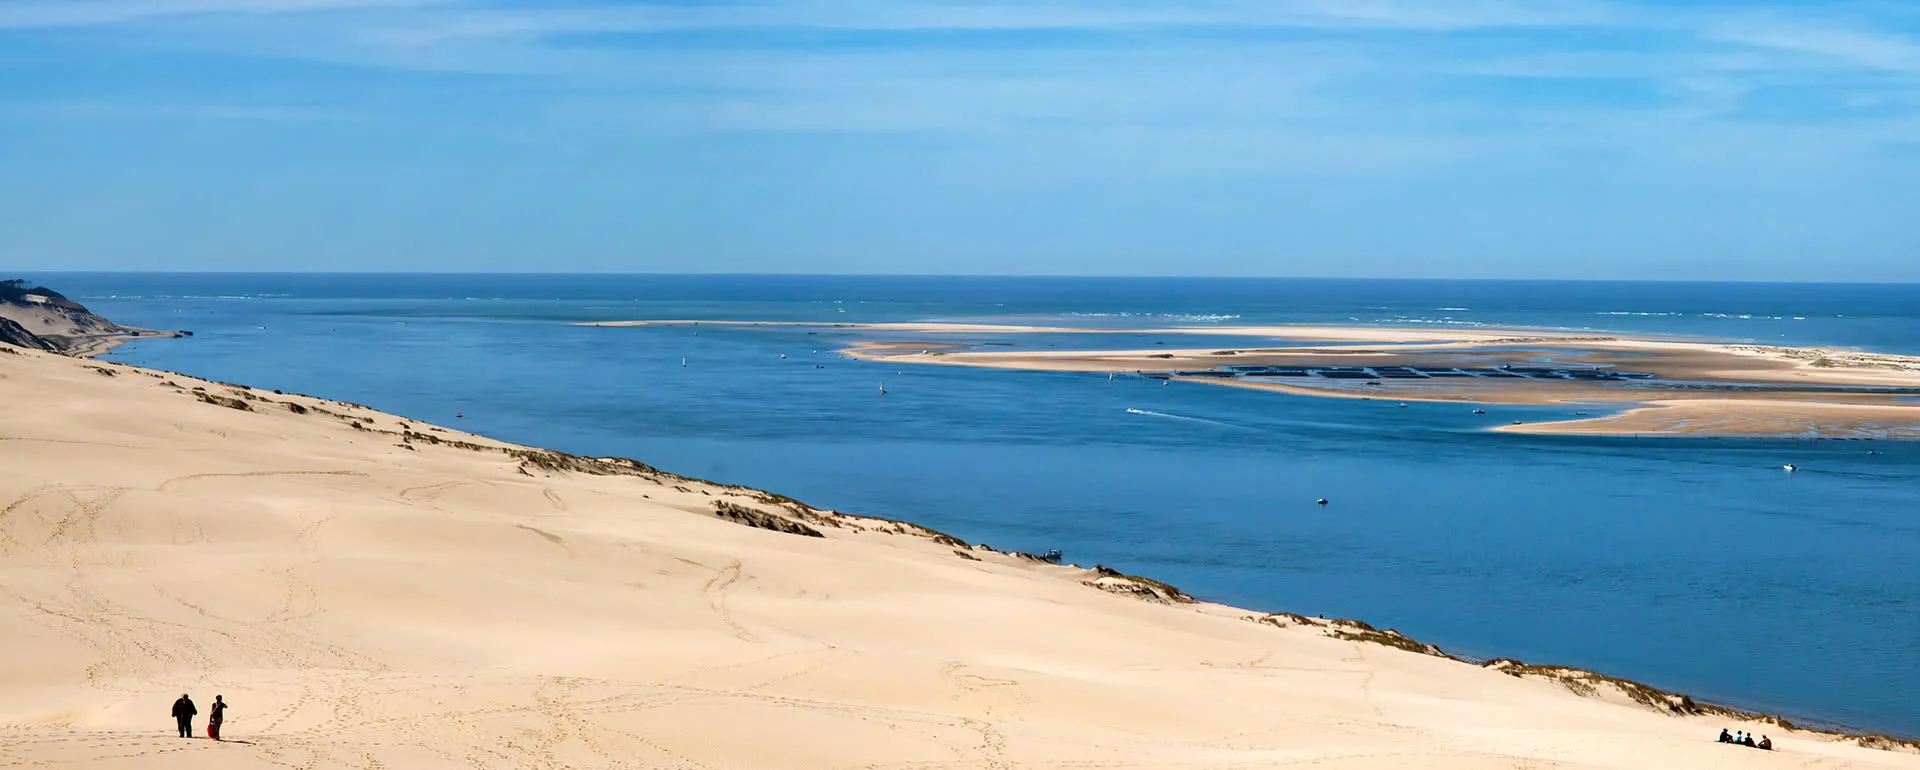 Arcachon - the destination with youth hostels